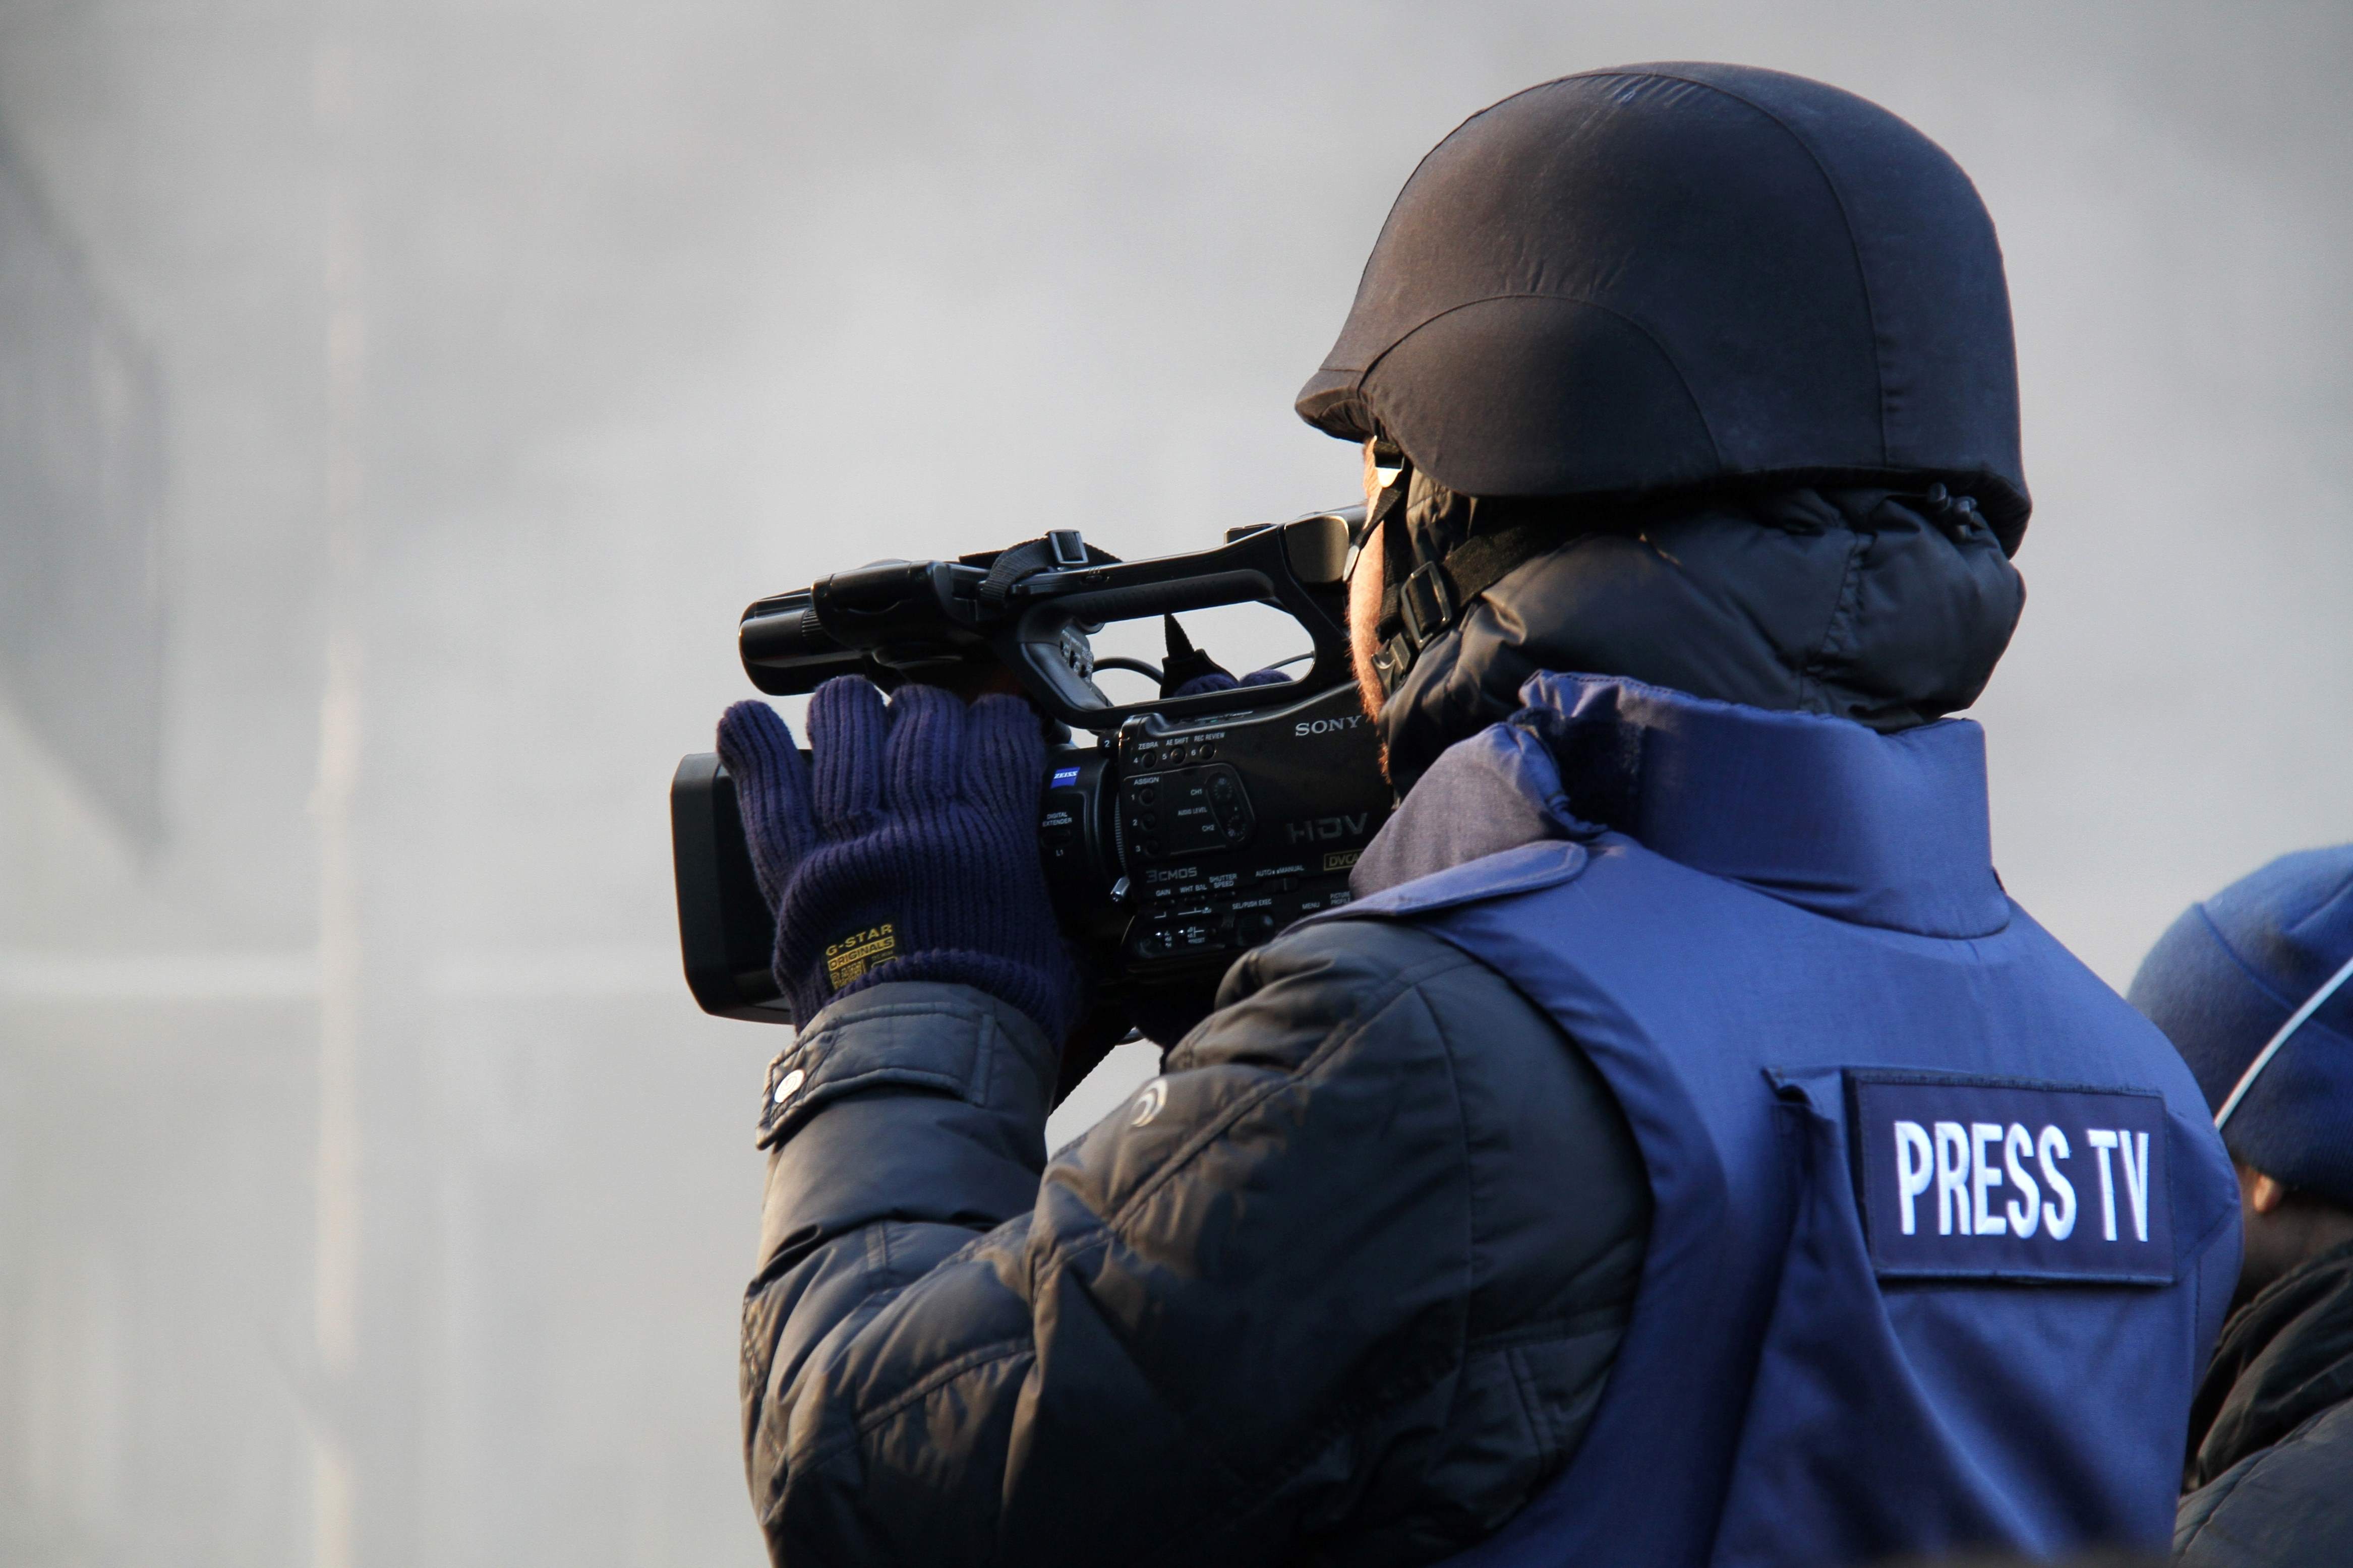 Journalist holding video camera wearing a blue helmet and a vest